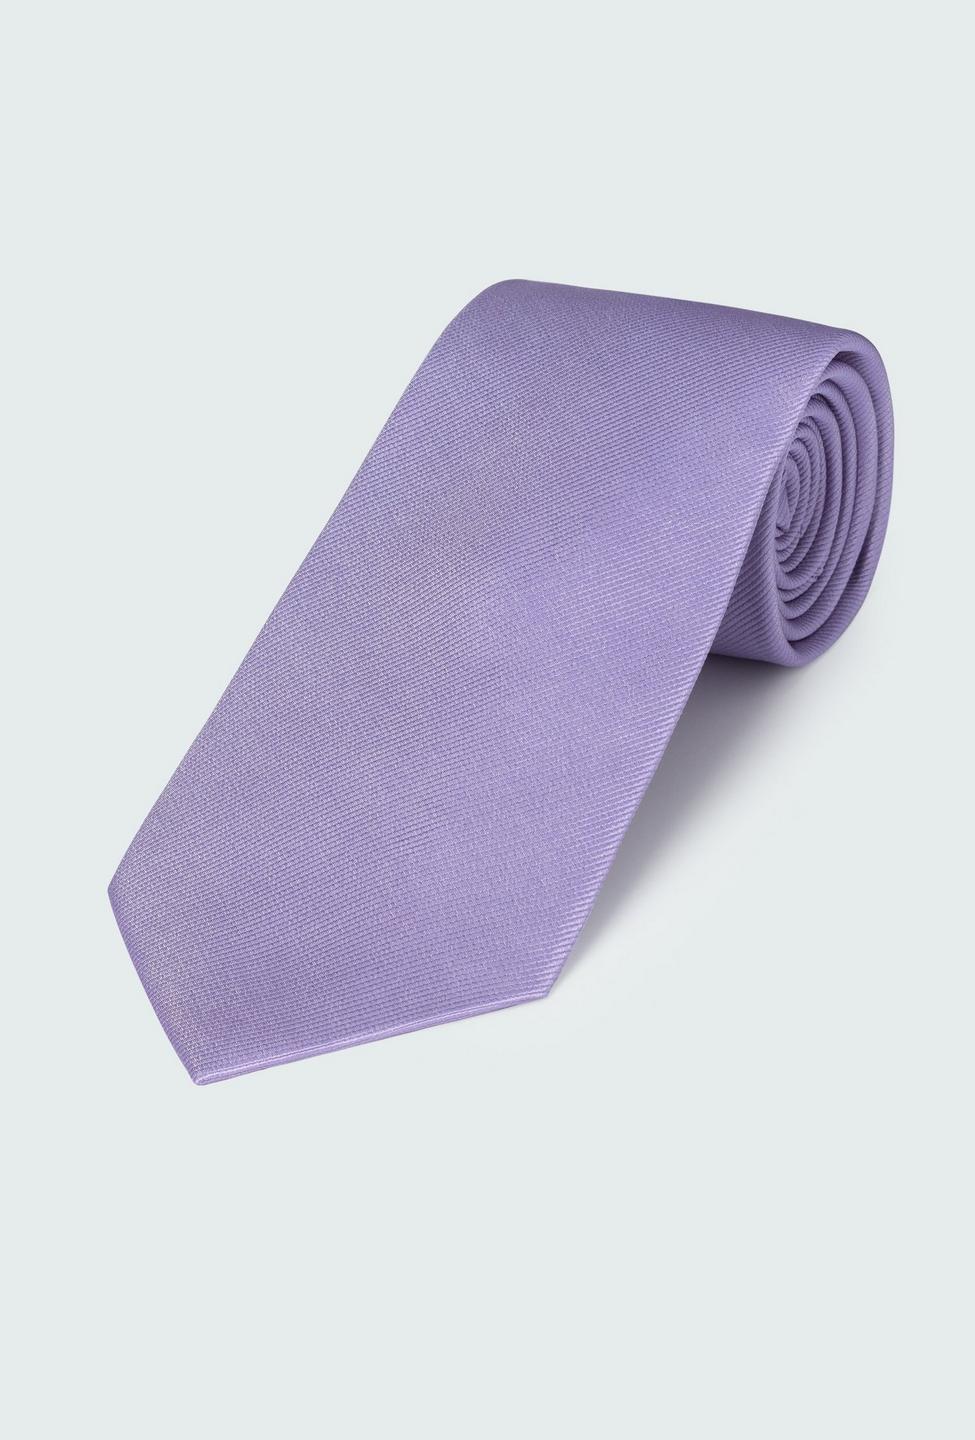 Purple tie - Solid Design from Indochino Collection